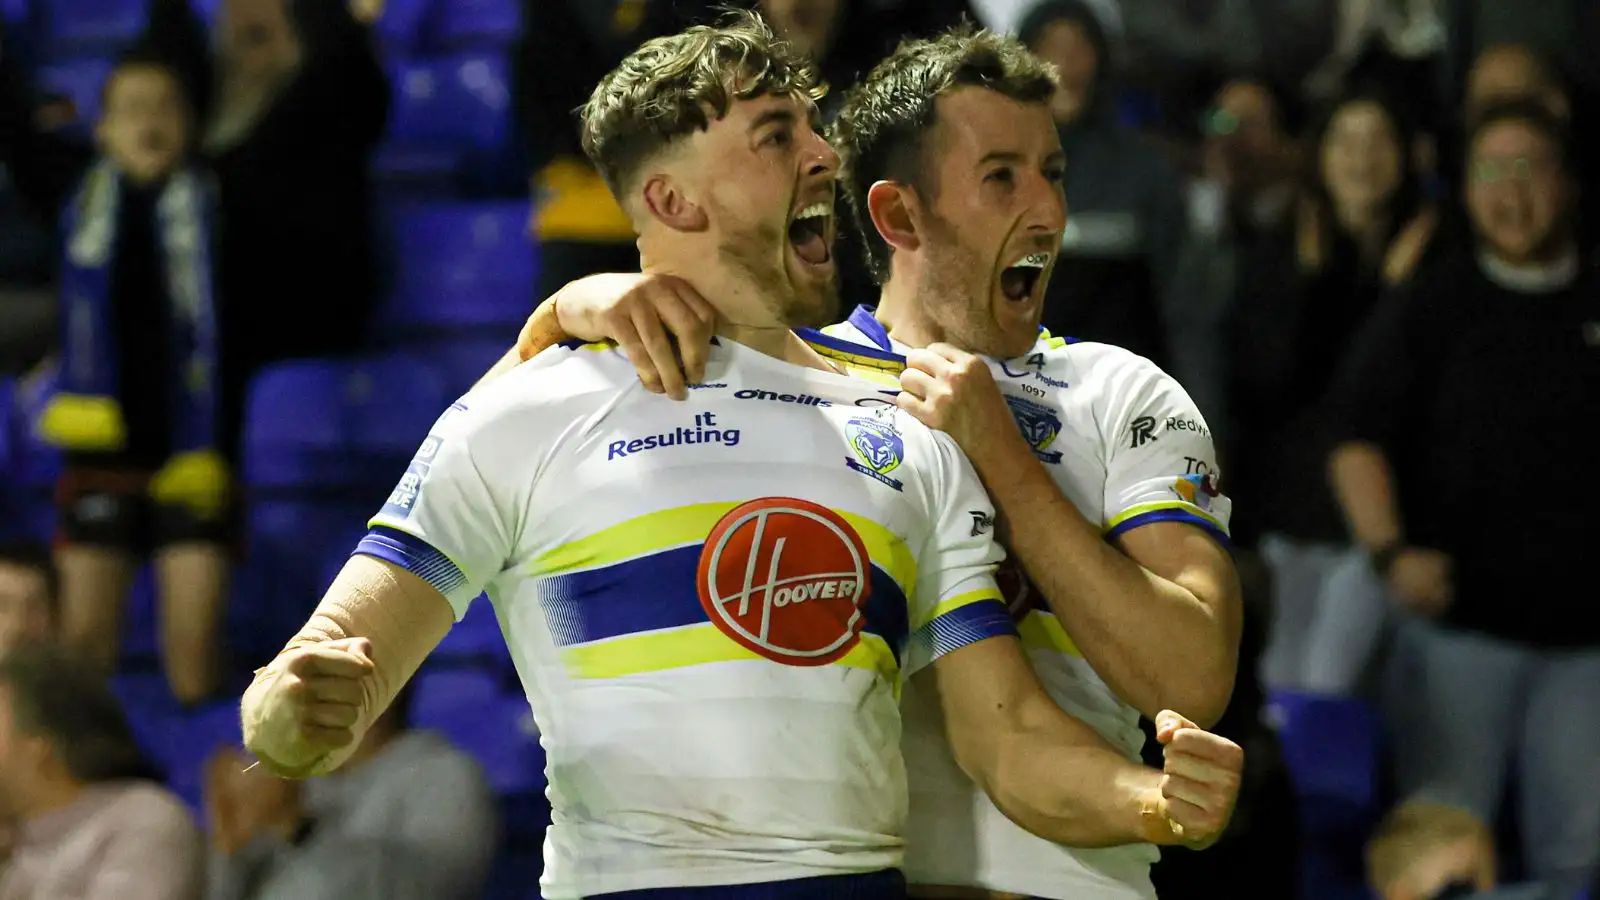 “He’s one of the best in the competition” – Warrington coach hails star player